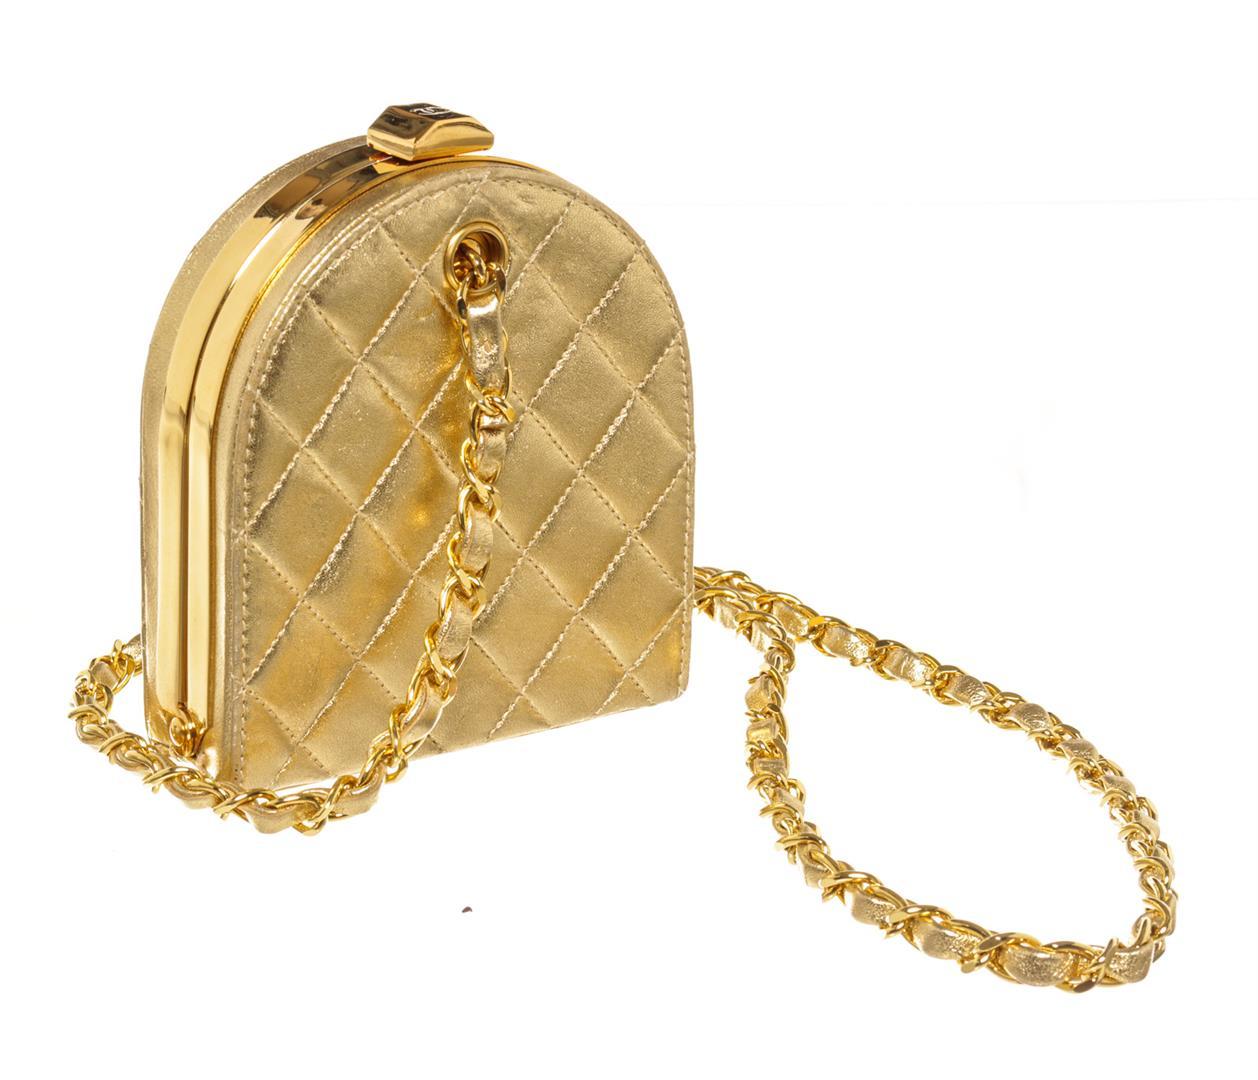 Chanel Vintage Gold Metallic Quilted Leather Frame Mini Clutch Bag